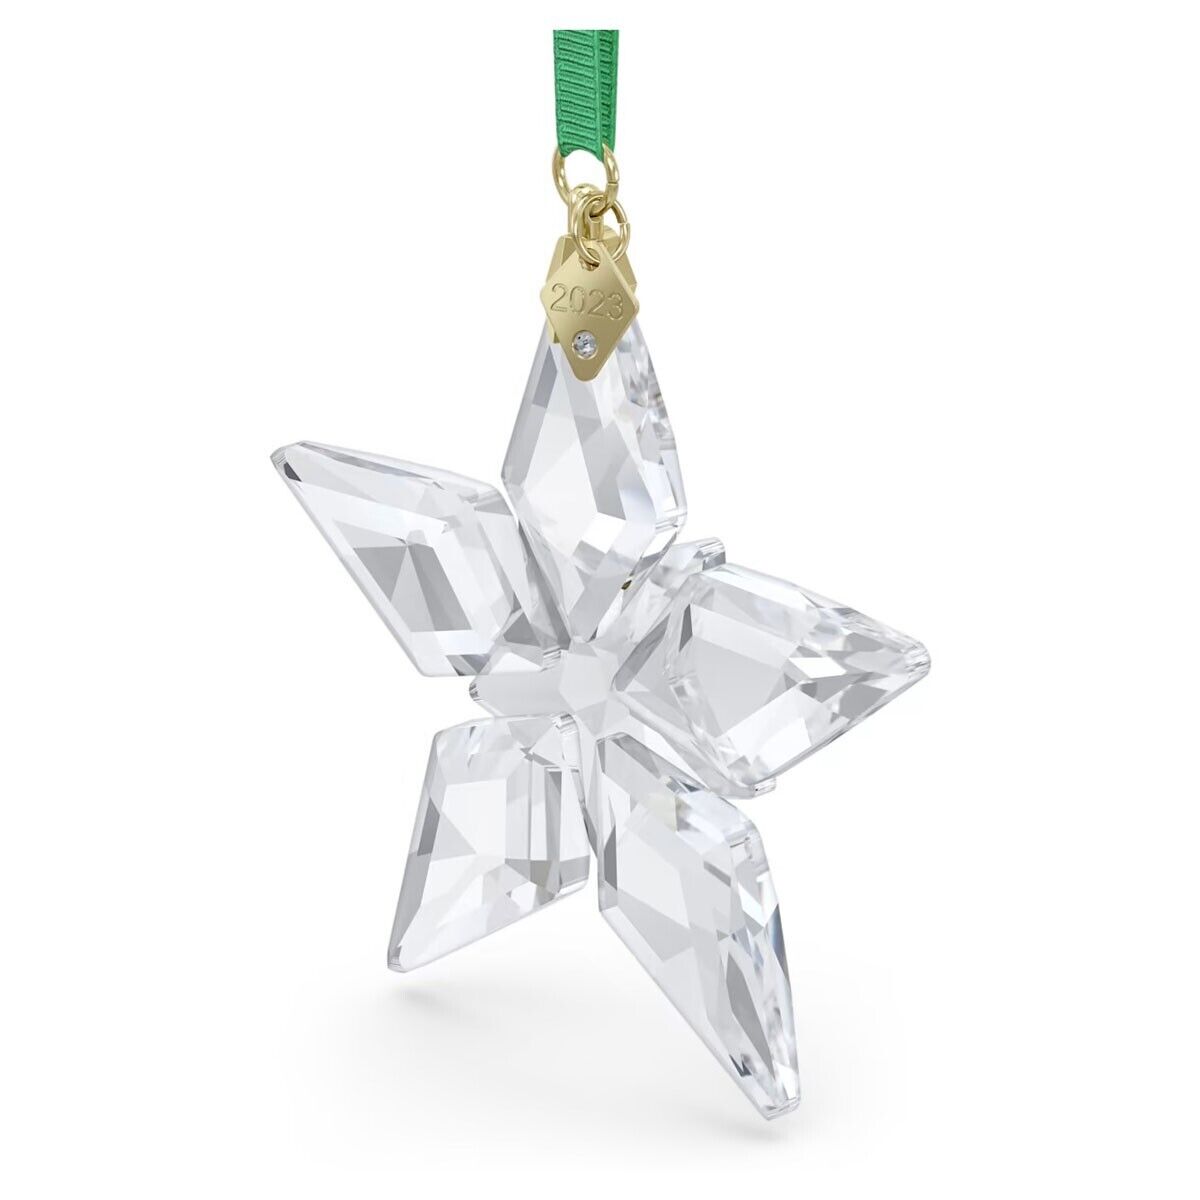 SWAROVSKI Annual Edition 2023 Ornament 5636253, Clear Crystal Star with 97 Facets, Gold-Tone Finished Tag, Part of the Swarovski Annual Edition Collection